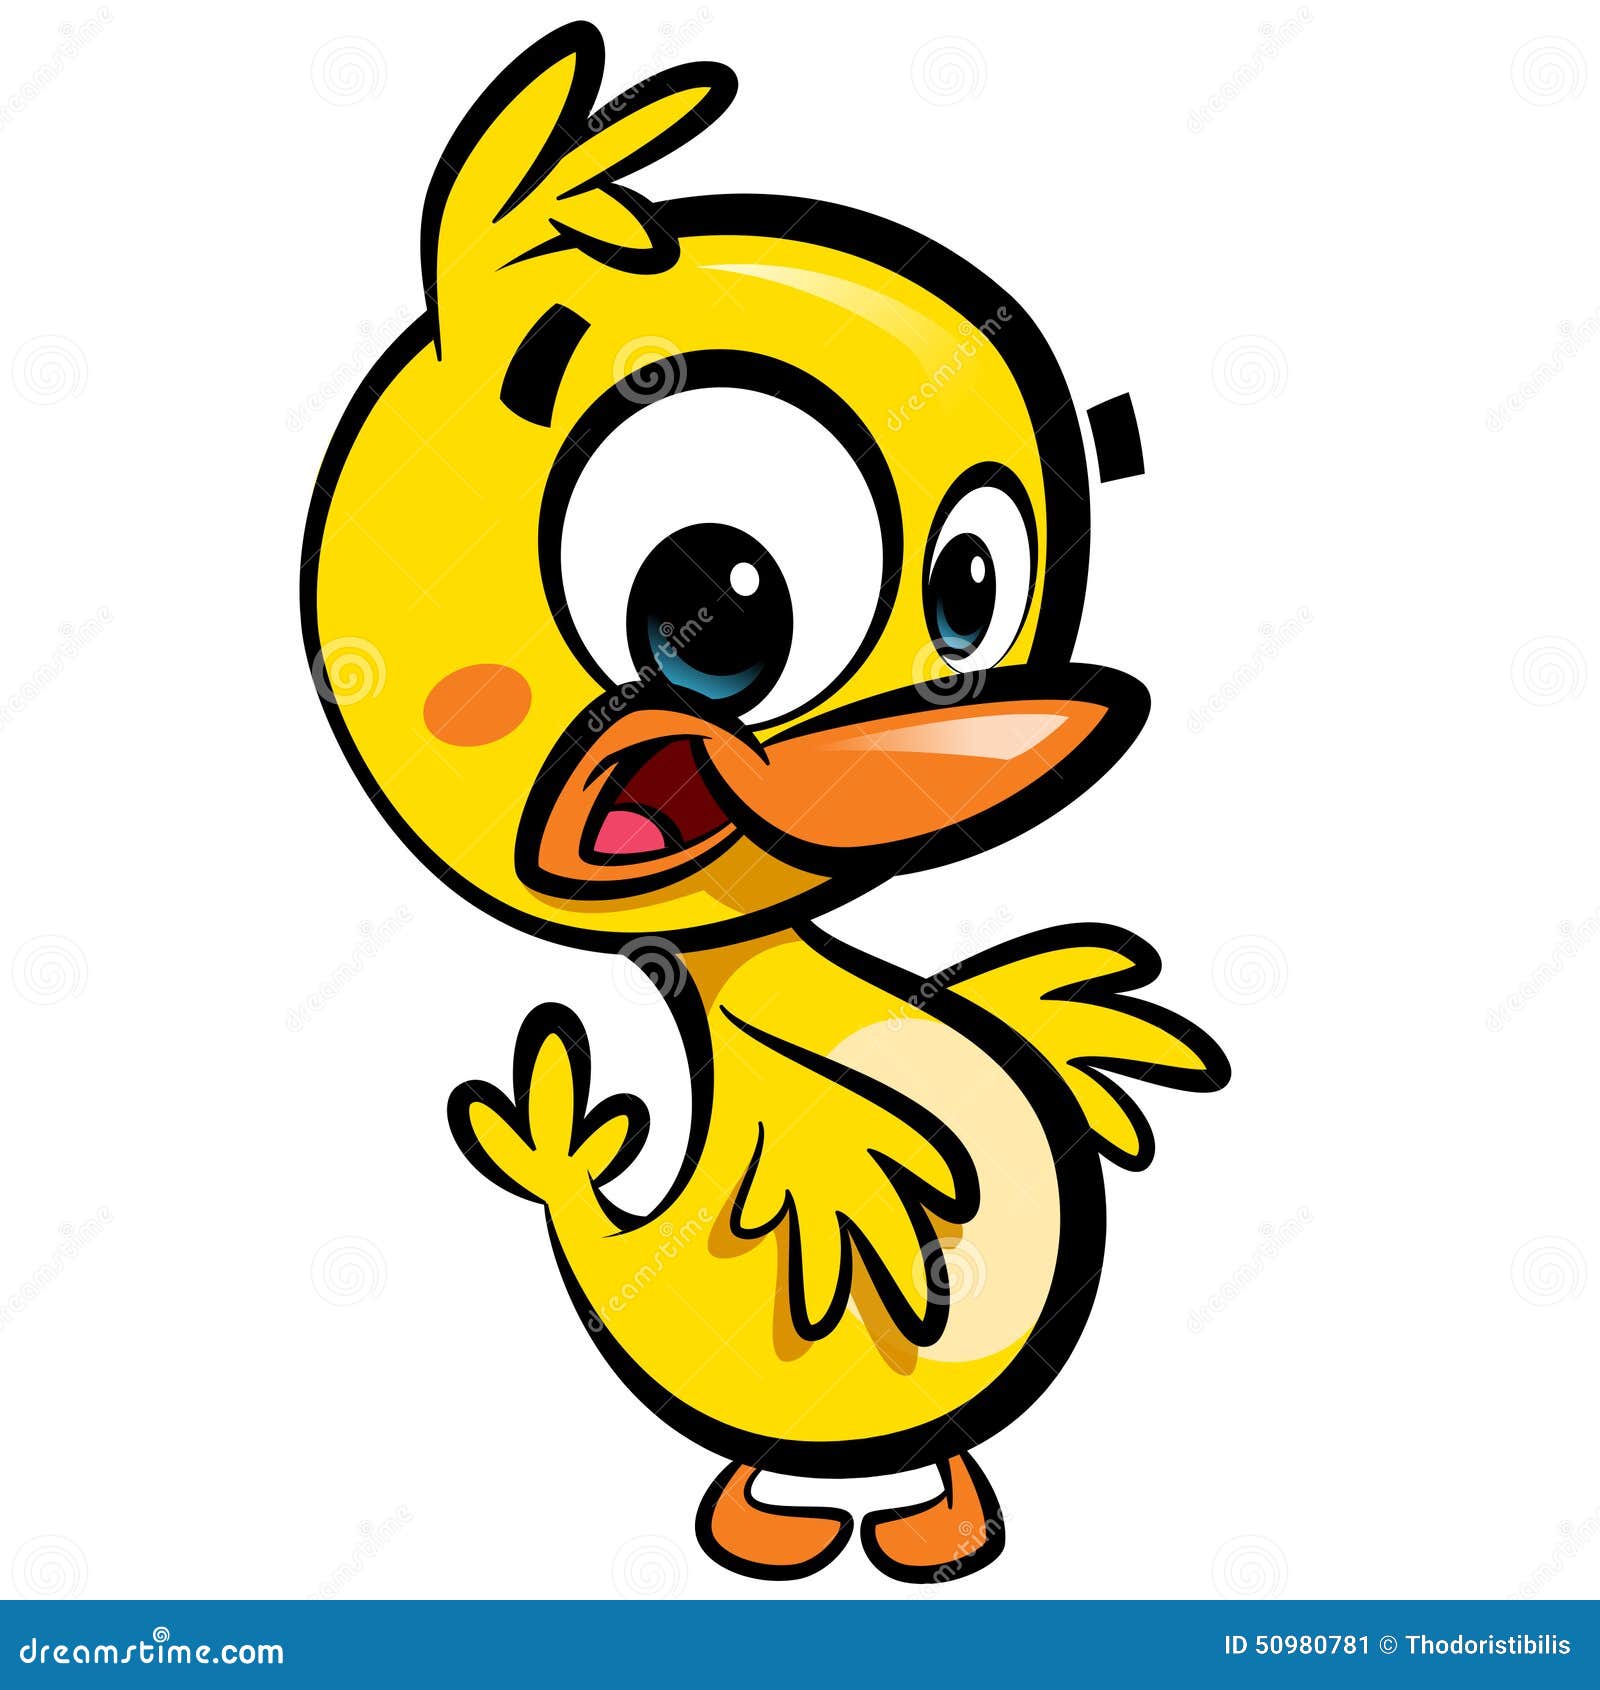 cartoon cute little smiling baby duck character with black outlines